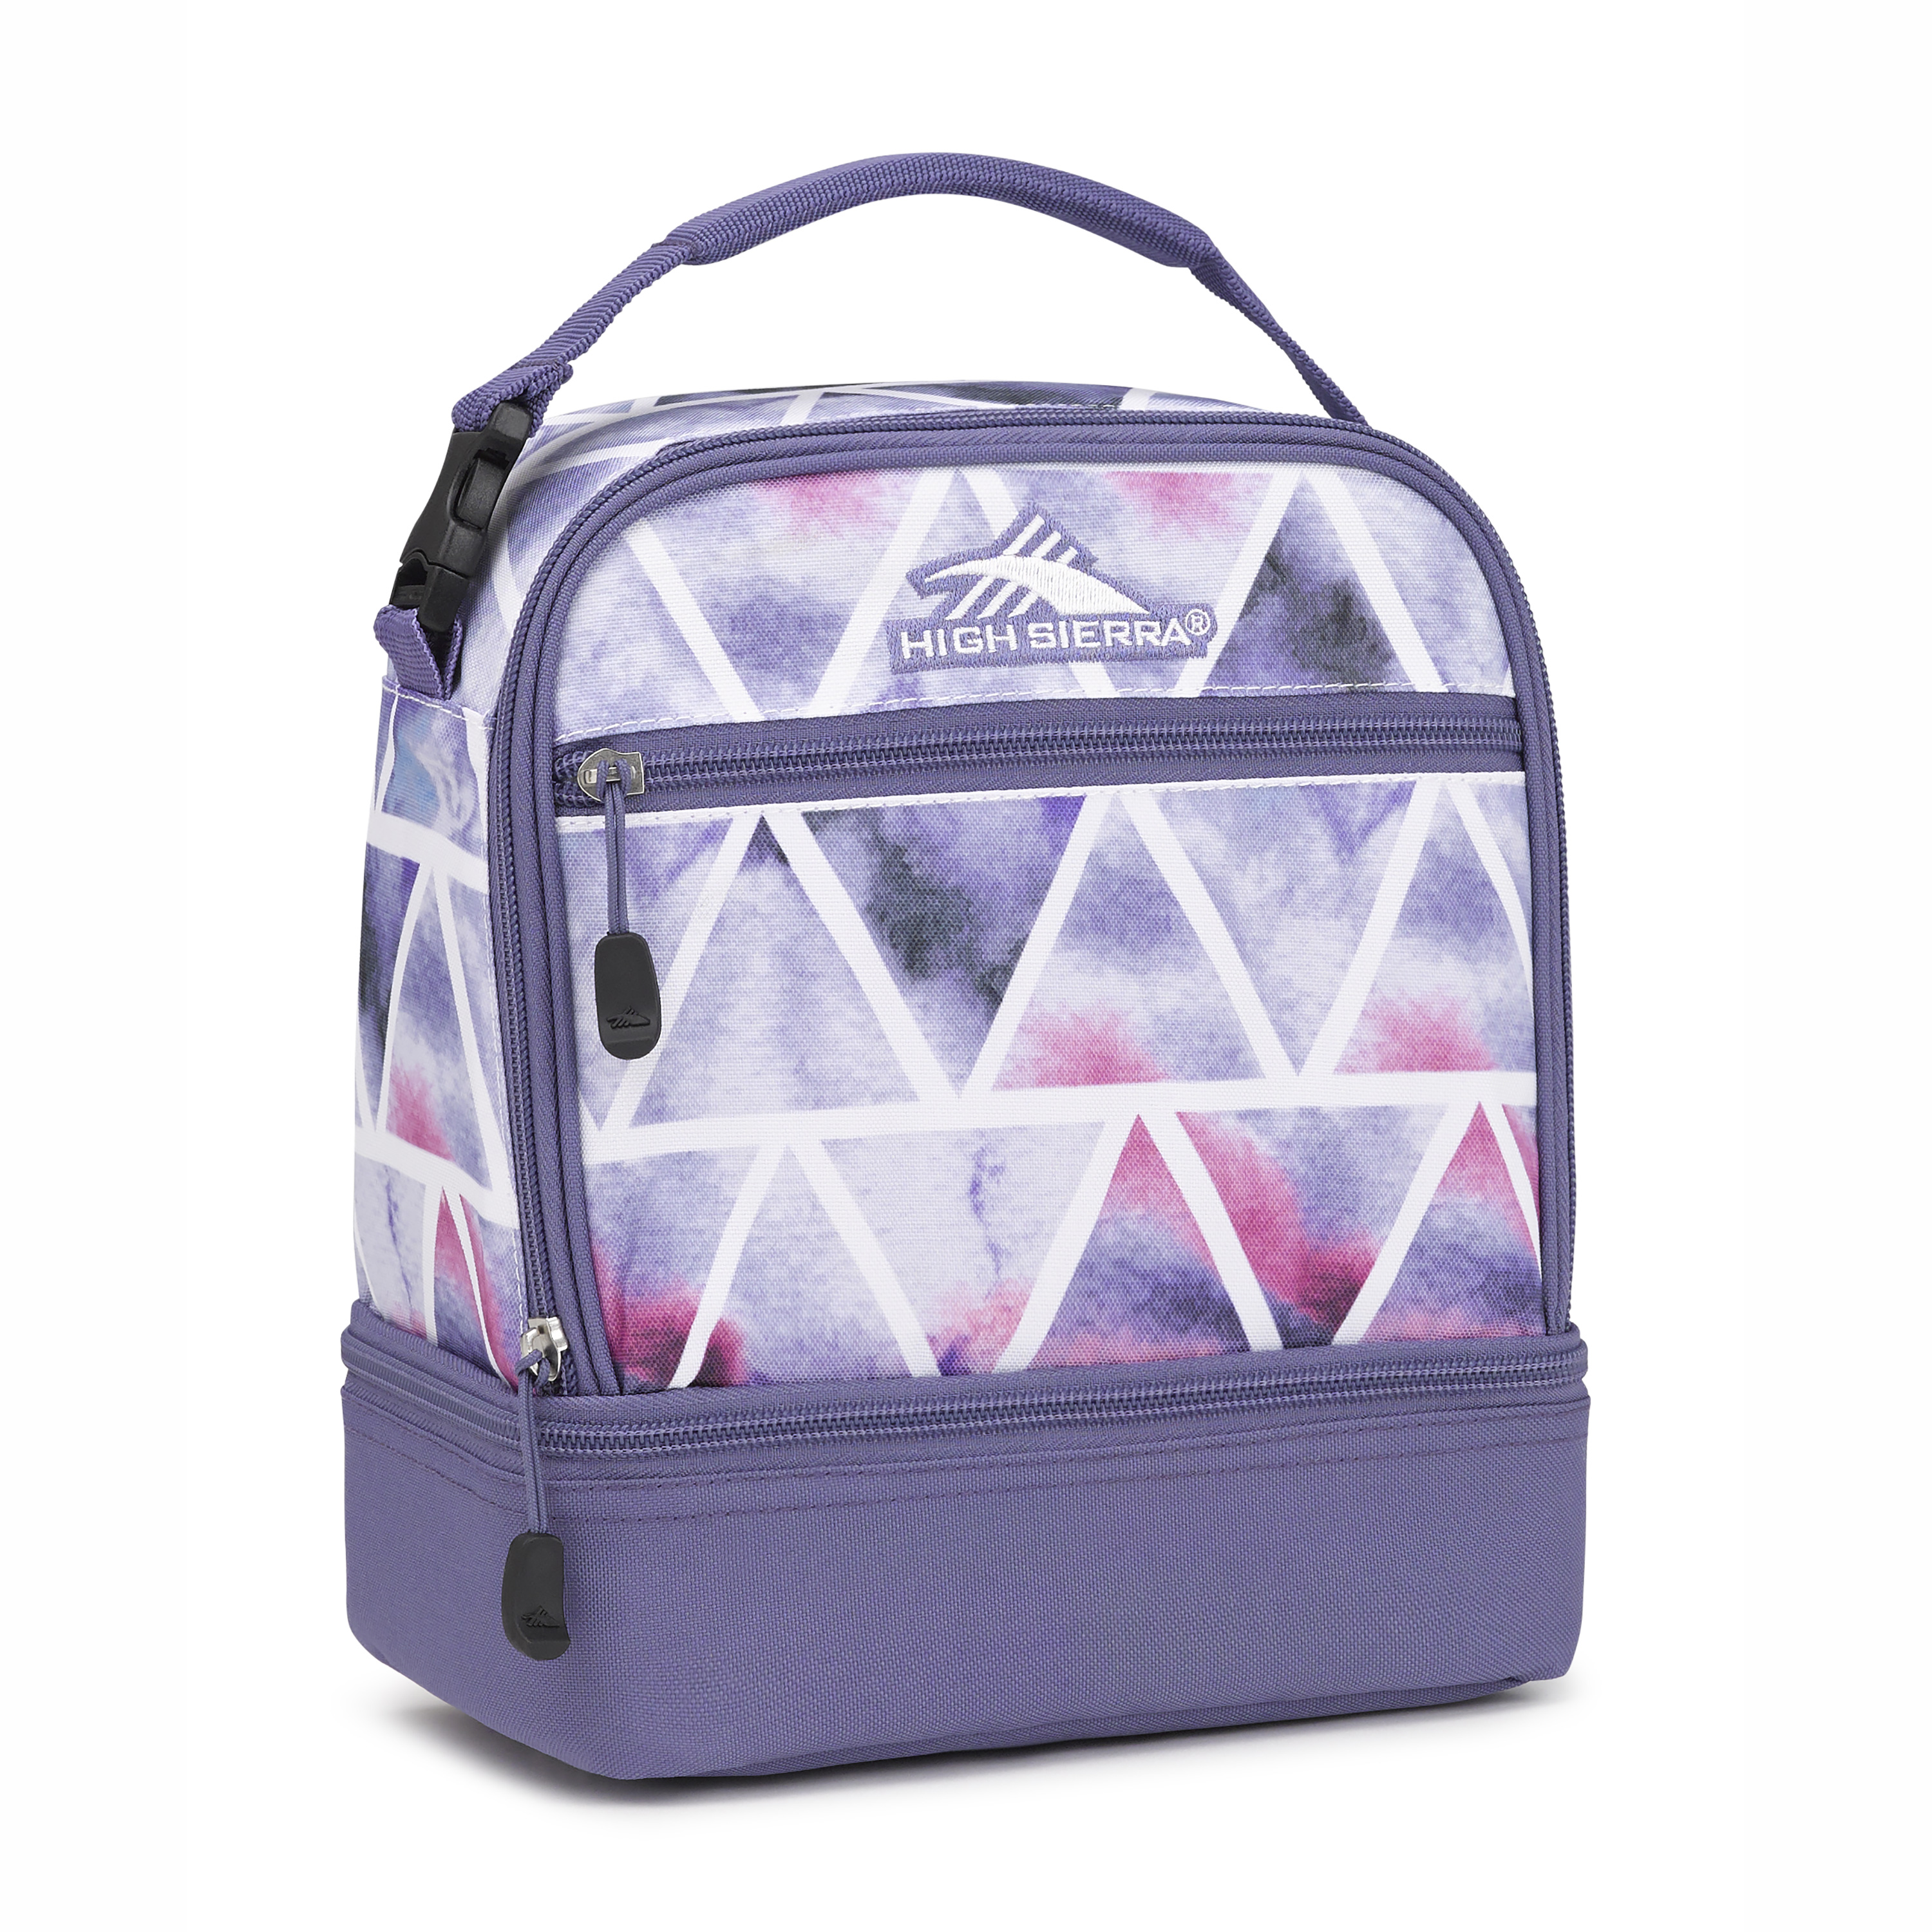 https://shop.highsierra.com/on/demandware.static/-/Sites-product-catalog/default/dw9609cdba/collections/_highsierra/LunchBags/500x500/747146735_STACKEDCOMPARTMENT_FRONT_ANGLE.jpg